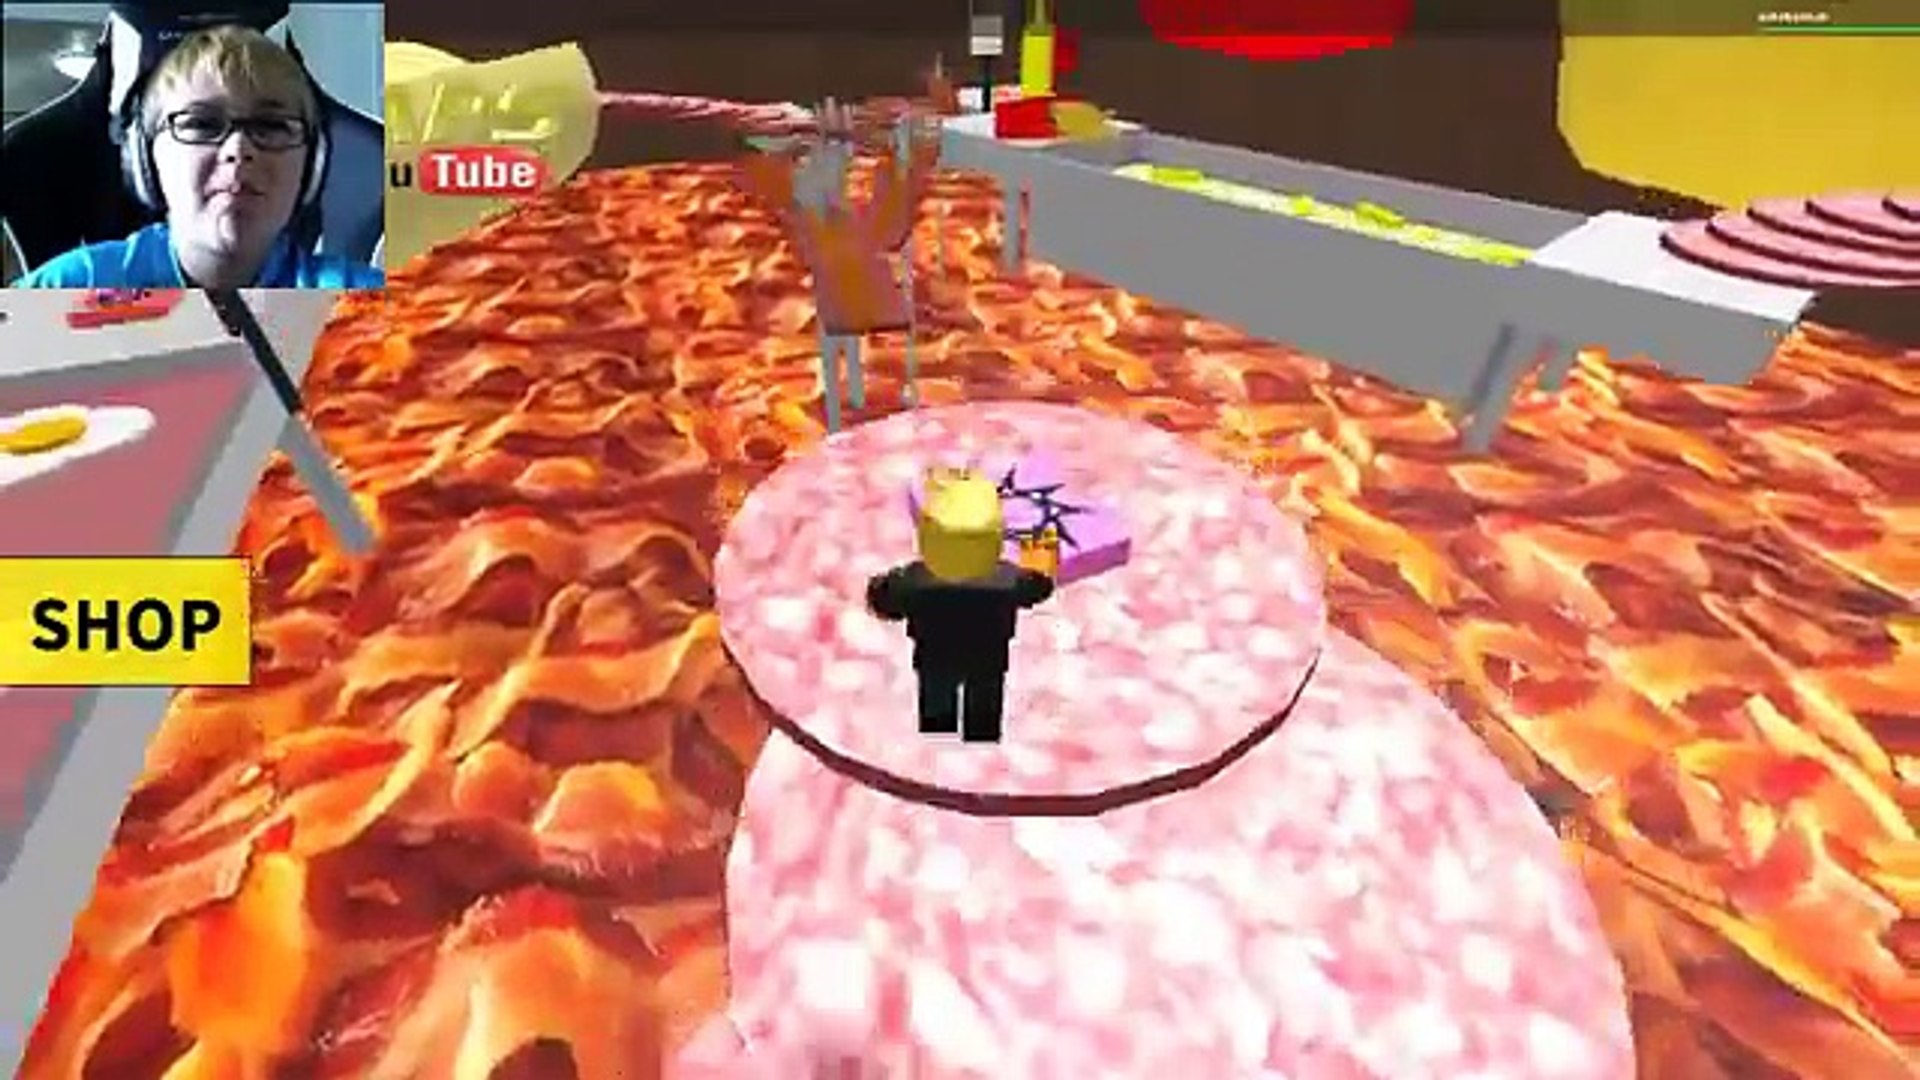 Auto Plays Roblox Escape A Giant Burger Obby Radiojh Games Video Dailymotion - new escape a giant burger obby roblox